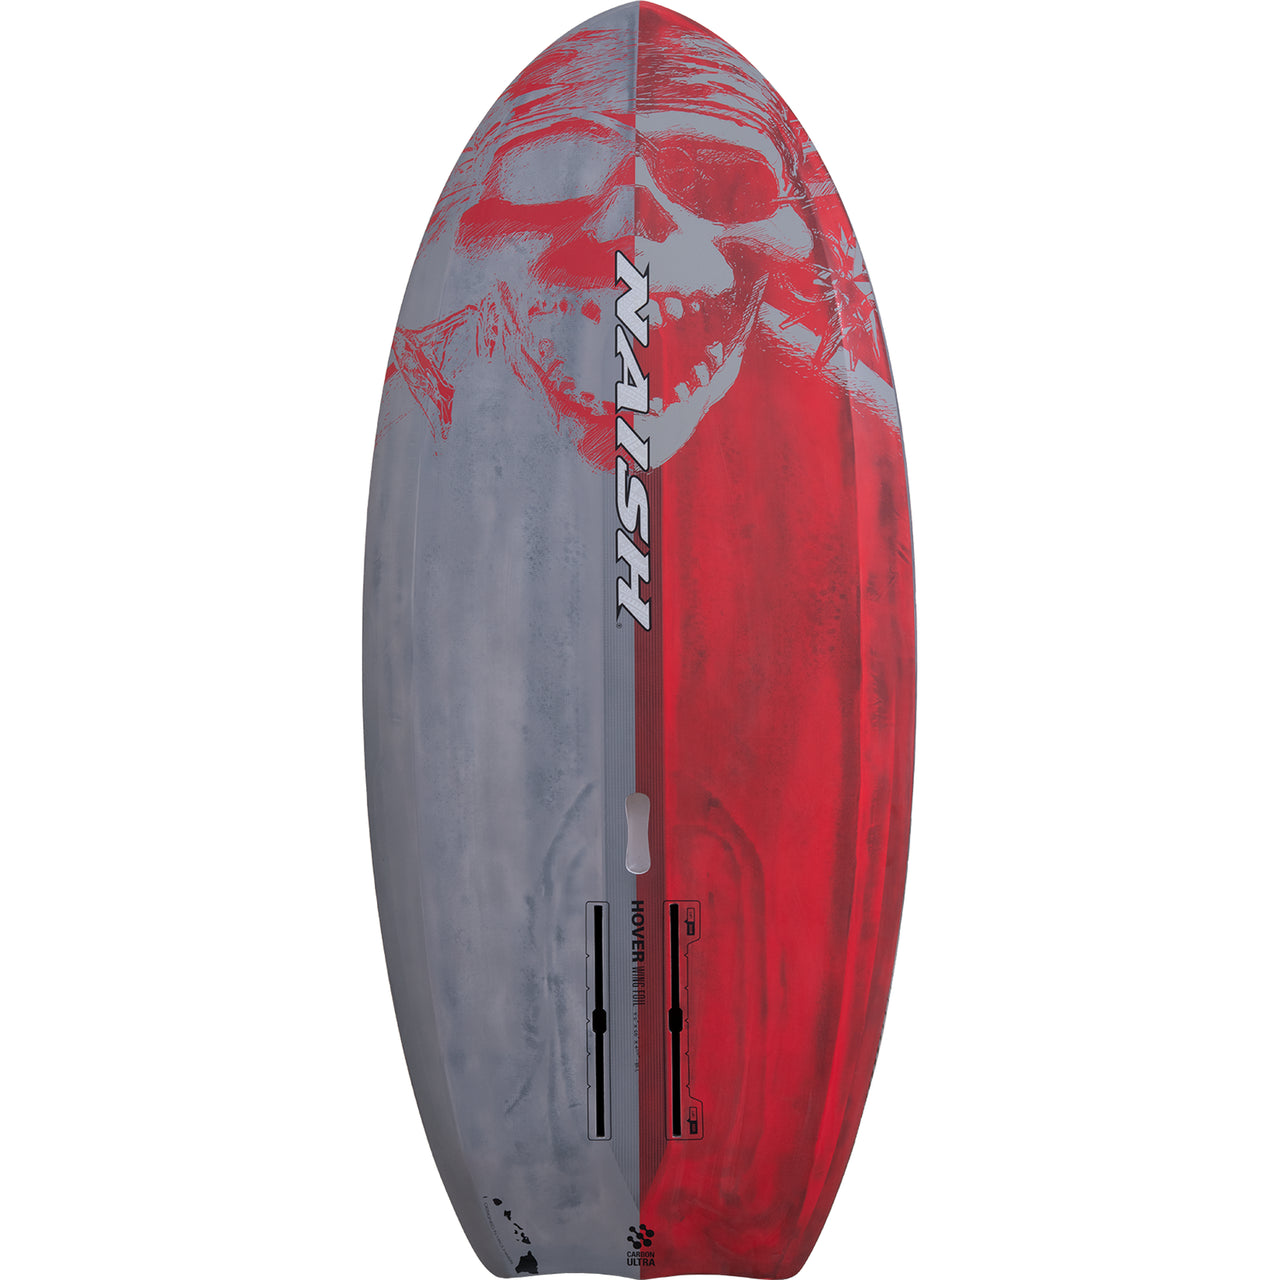 Naish Hover Wing Foil Carbon Ultra LE Wing-Surfing/Foil SUP 110 Liter